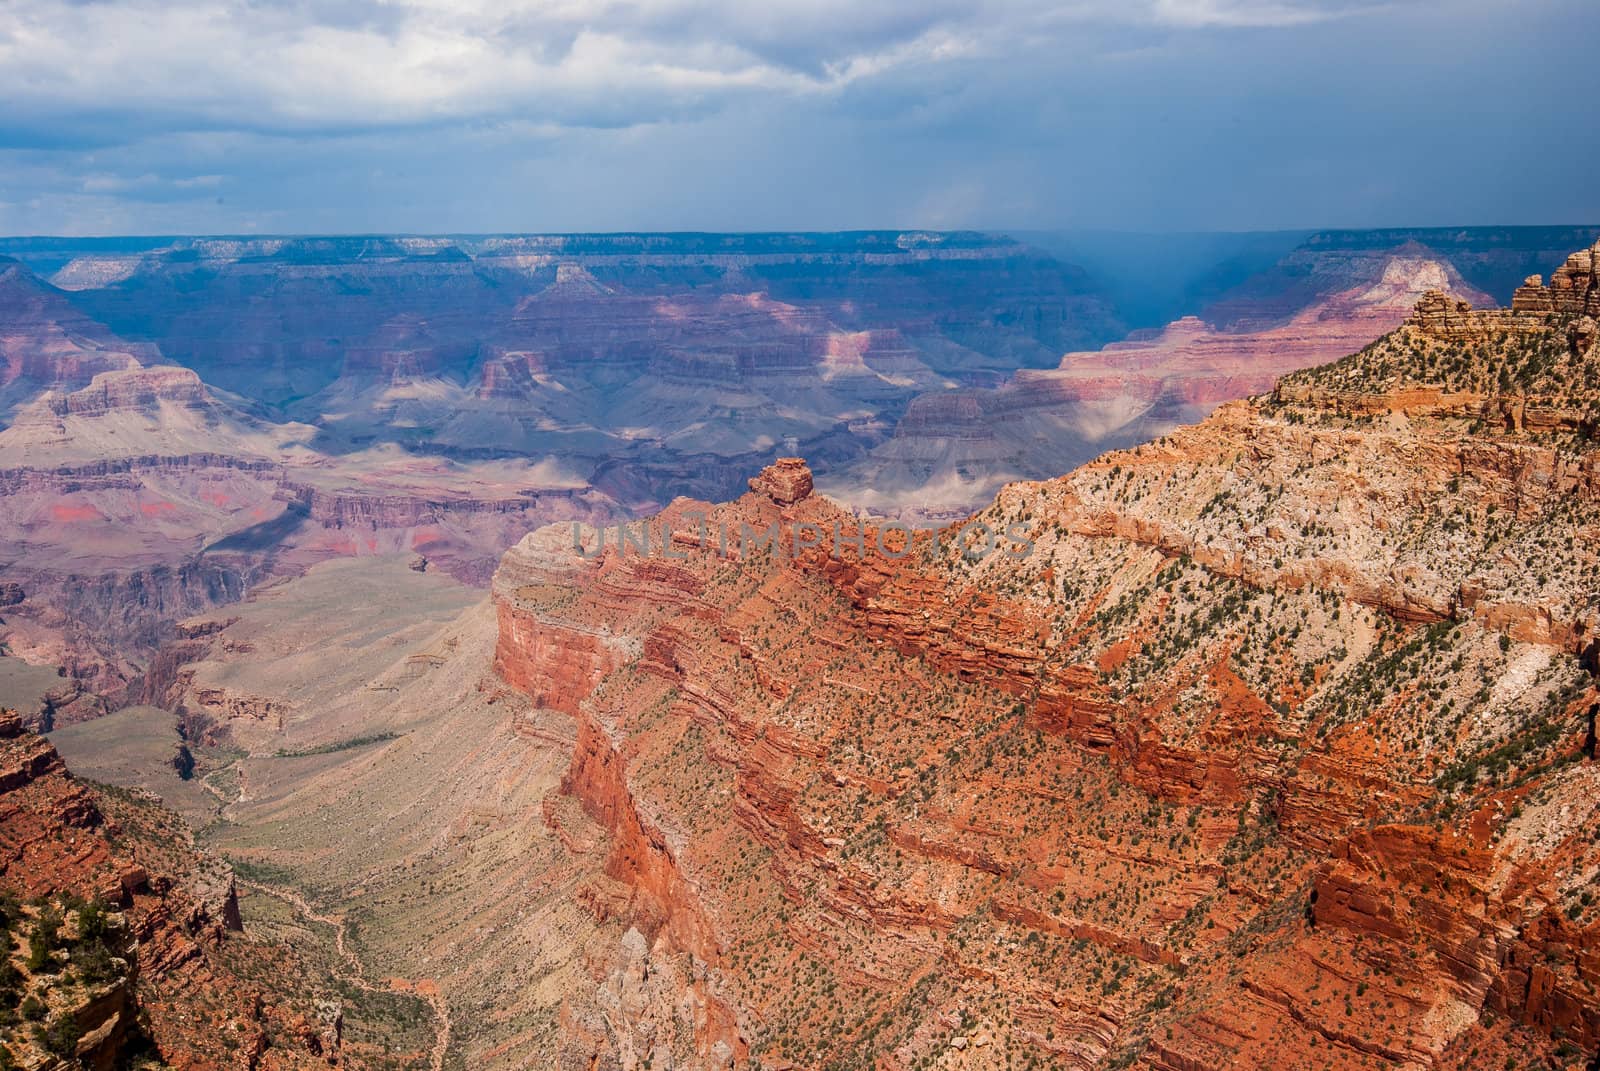 Photograph of the North Rim of the Grand Canyon with a storm fast approaching.